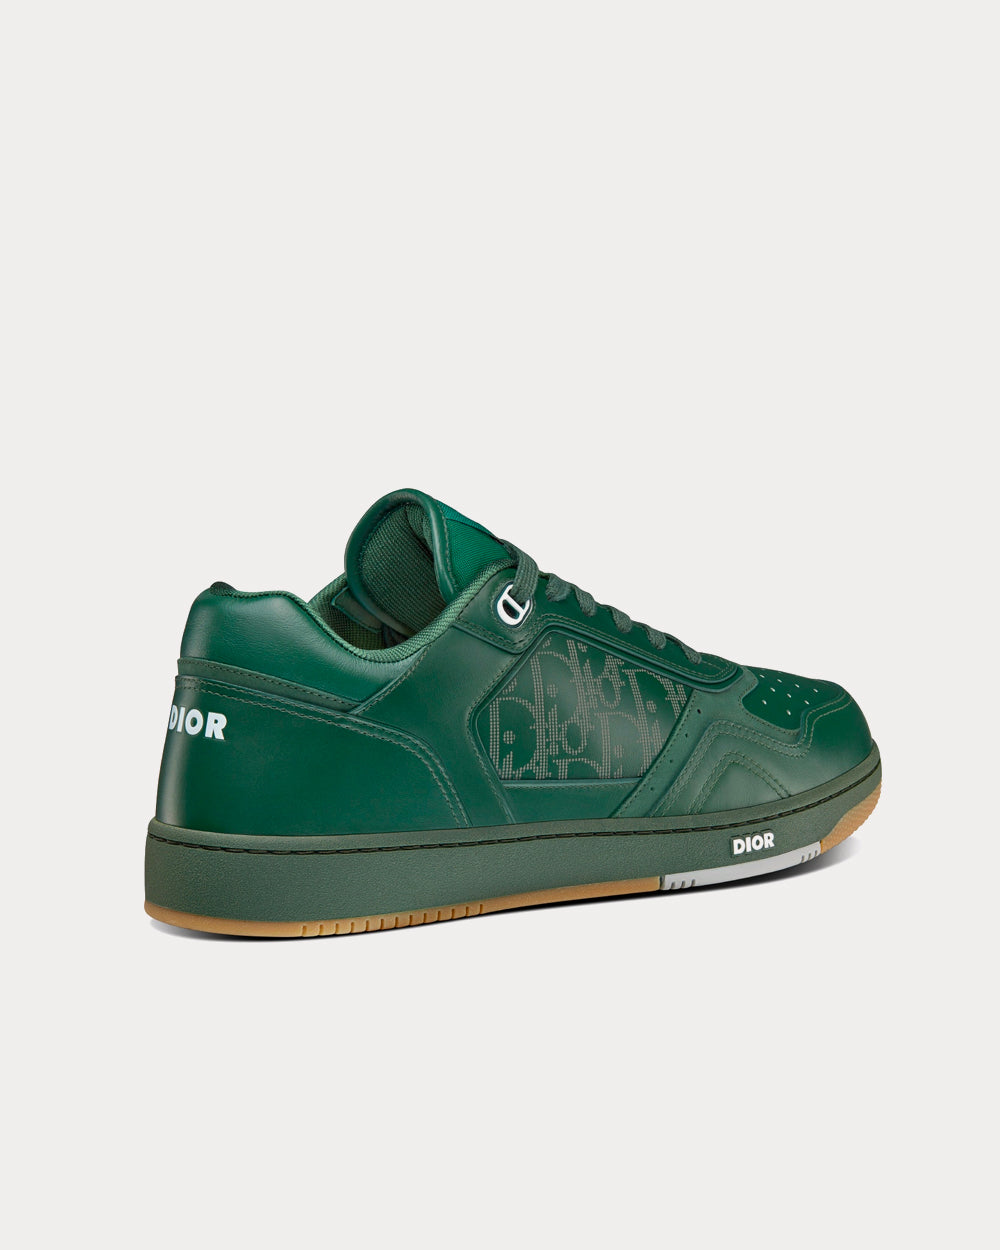 Dior - World Tour B27 Green Dior Oblique Galaxy Leather with Smooth Calfskin and Suede Low Top Sneakers